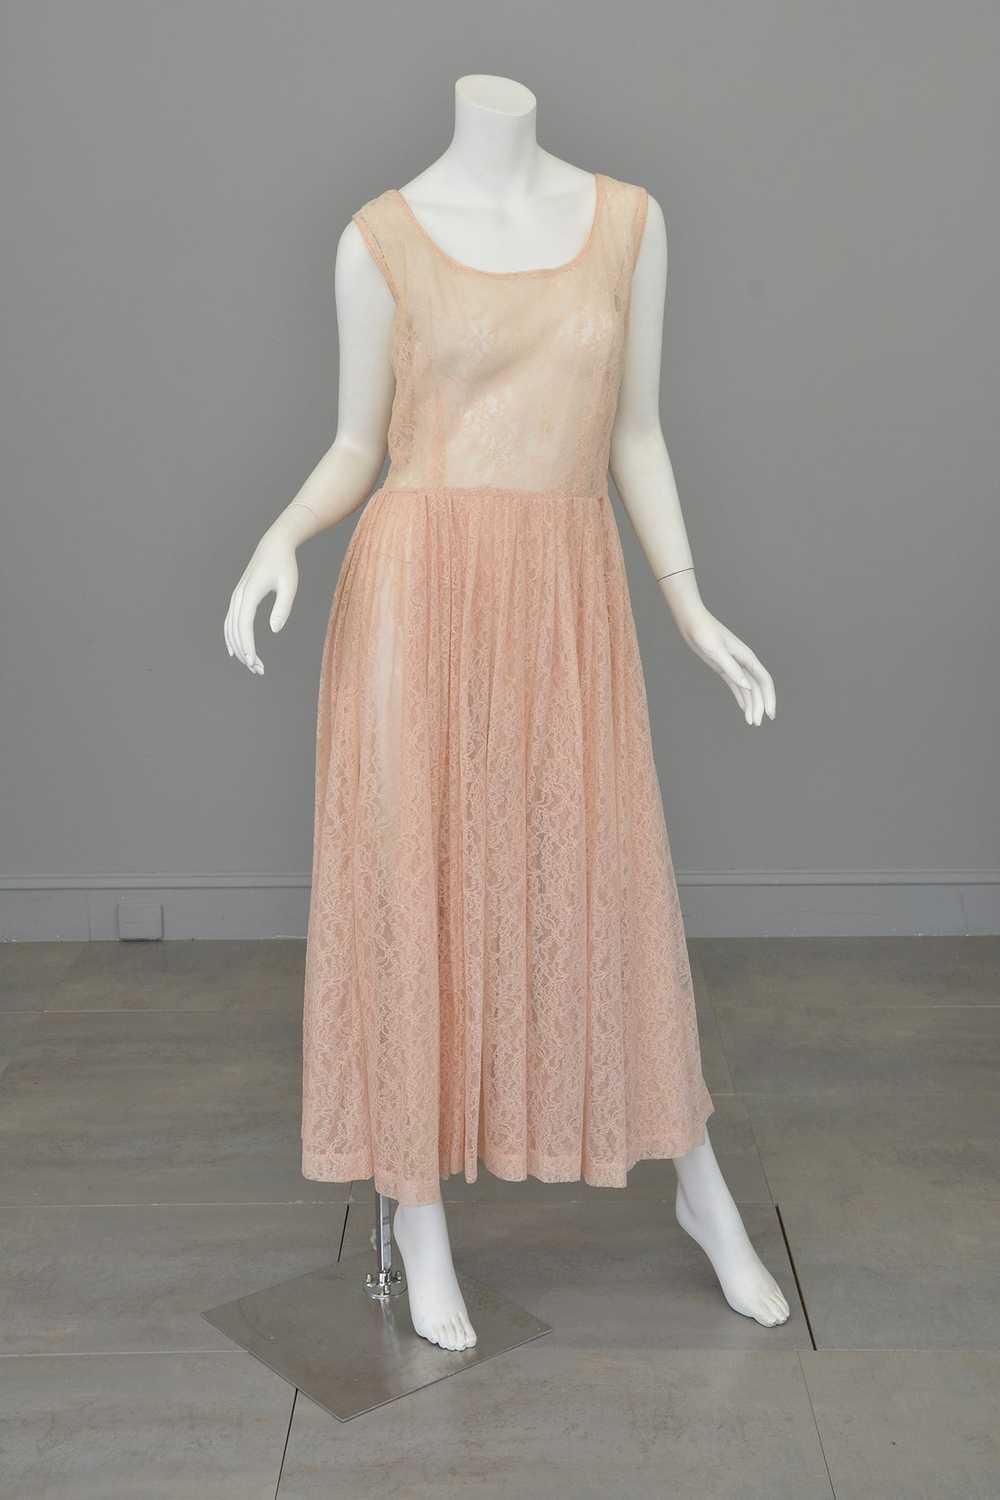 1940s 50s Sheer Light Pink Embroidered Lace Gown - image 1